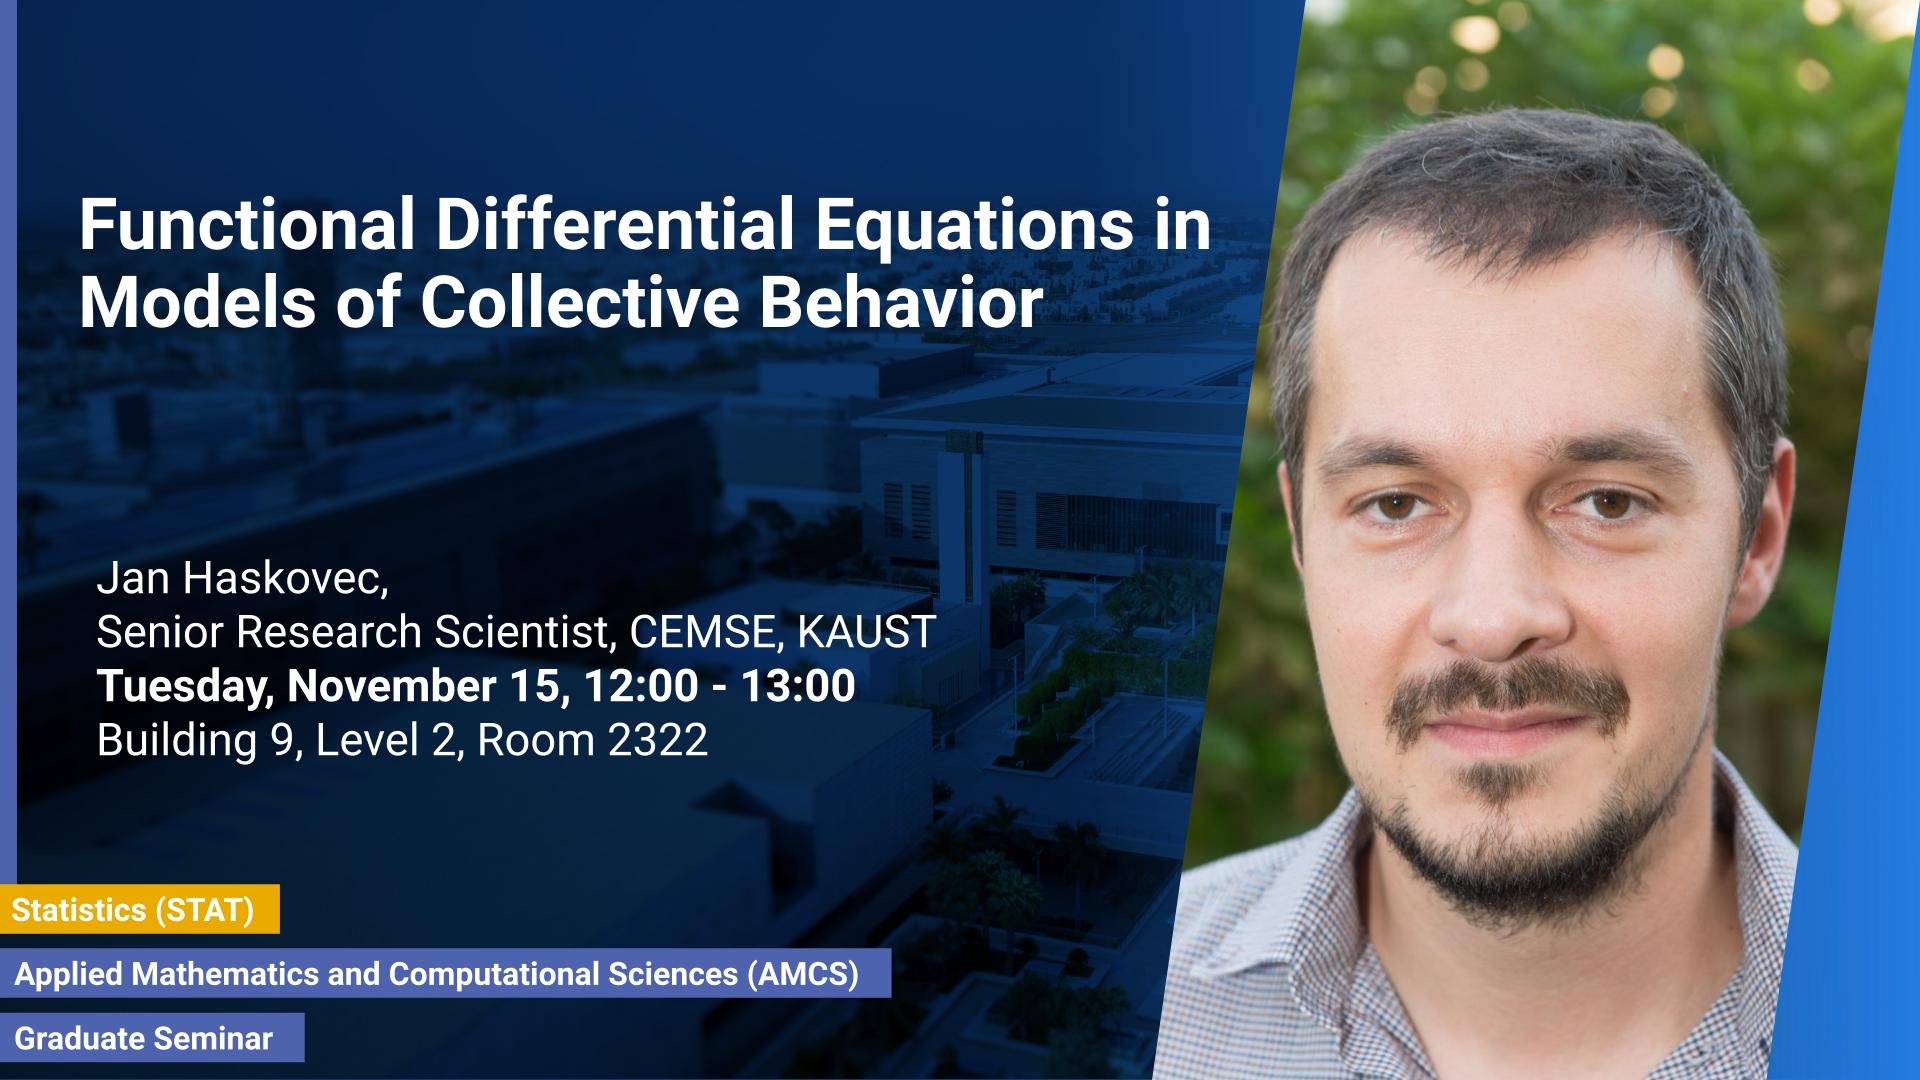 KAUST-CEMSE-AMCS-STAT-Graduate Seminar-Functional Differential Equations in Models of Collective Behavior